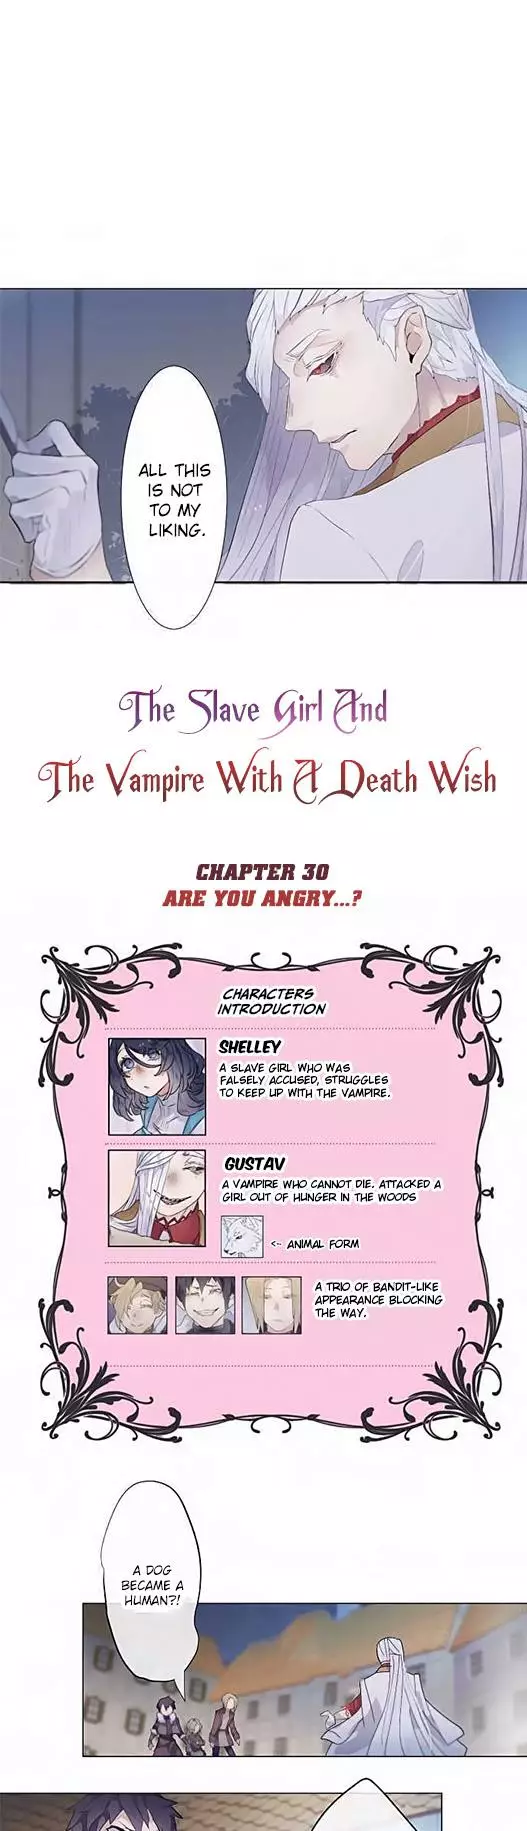 The Slave Girl And The Vampire With A Death Wish - 30 page 2-e00b52f0